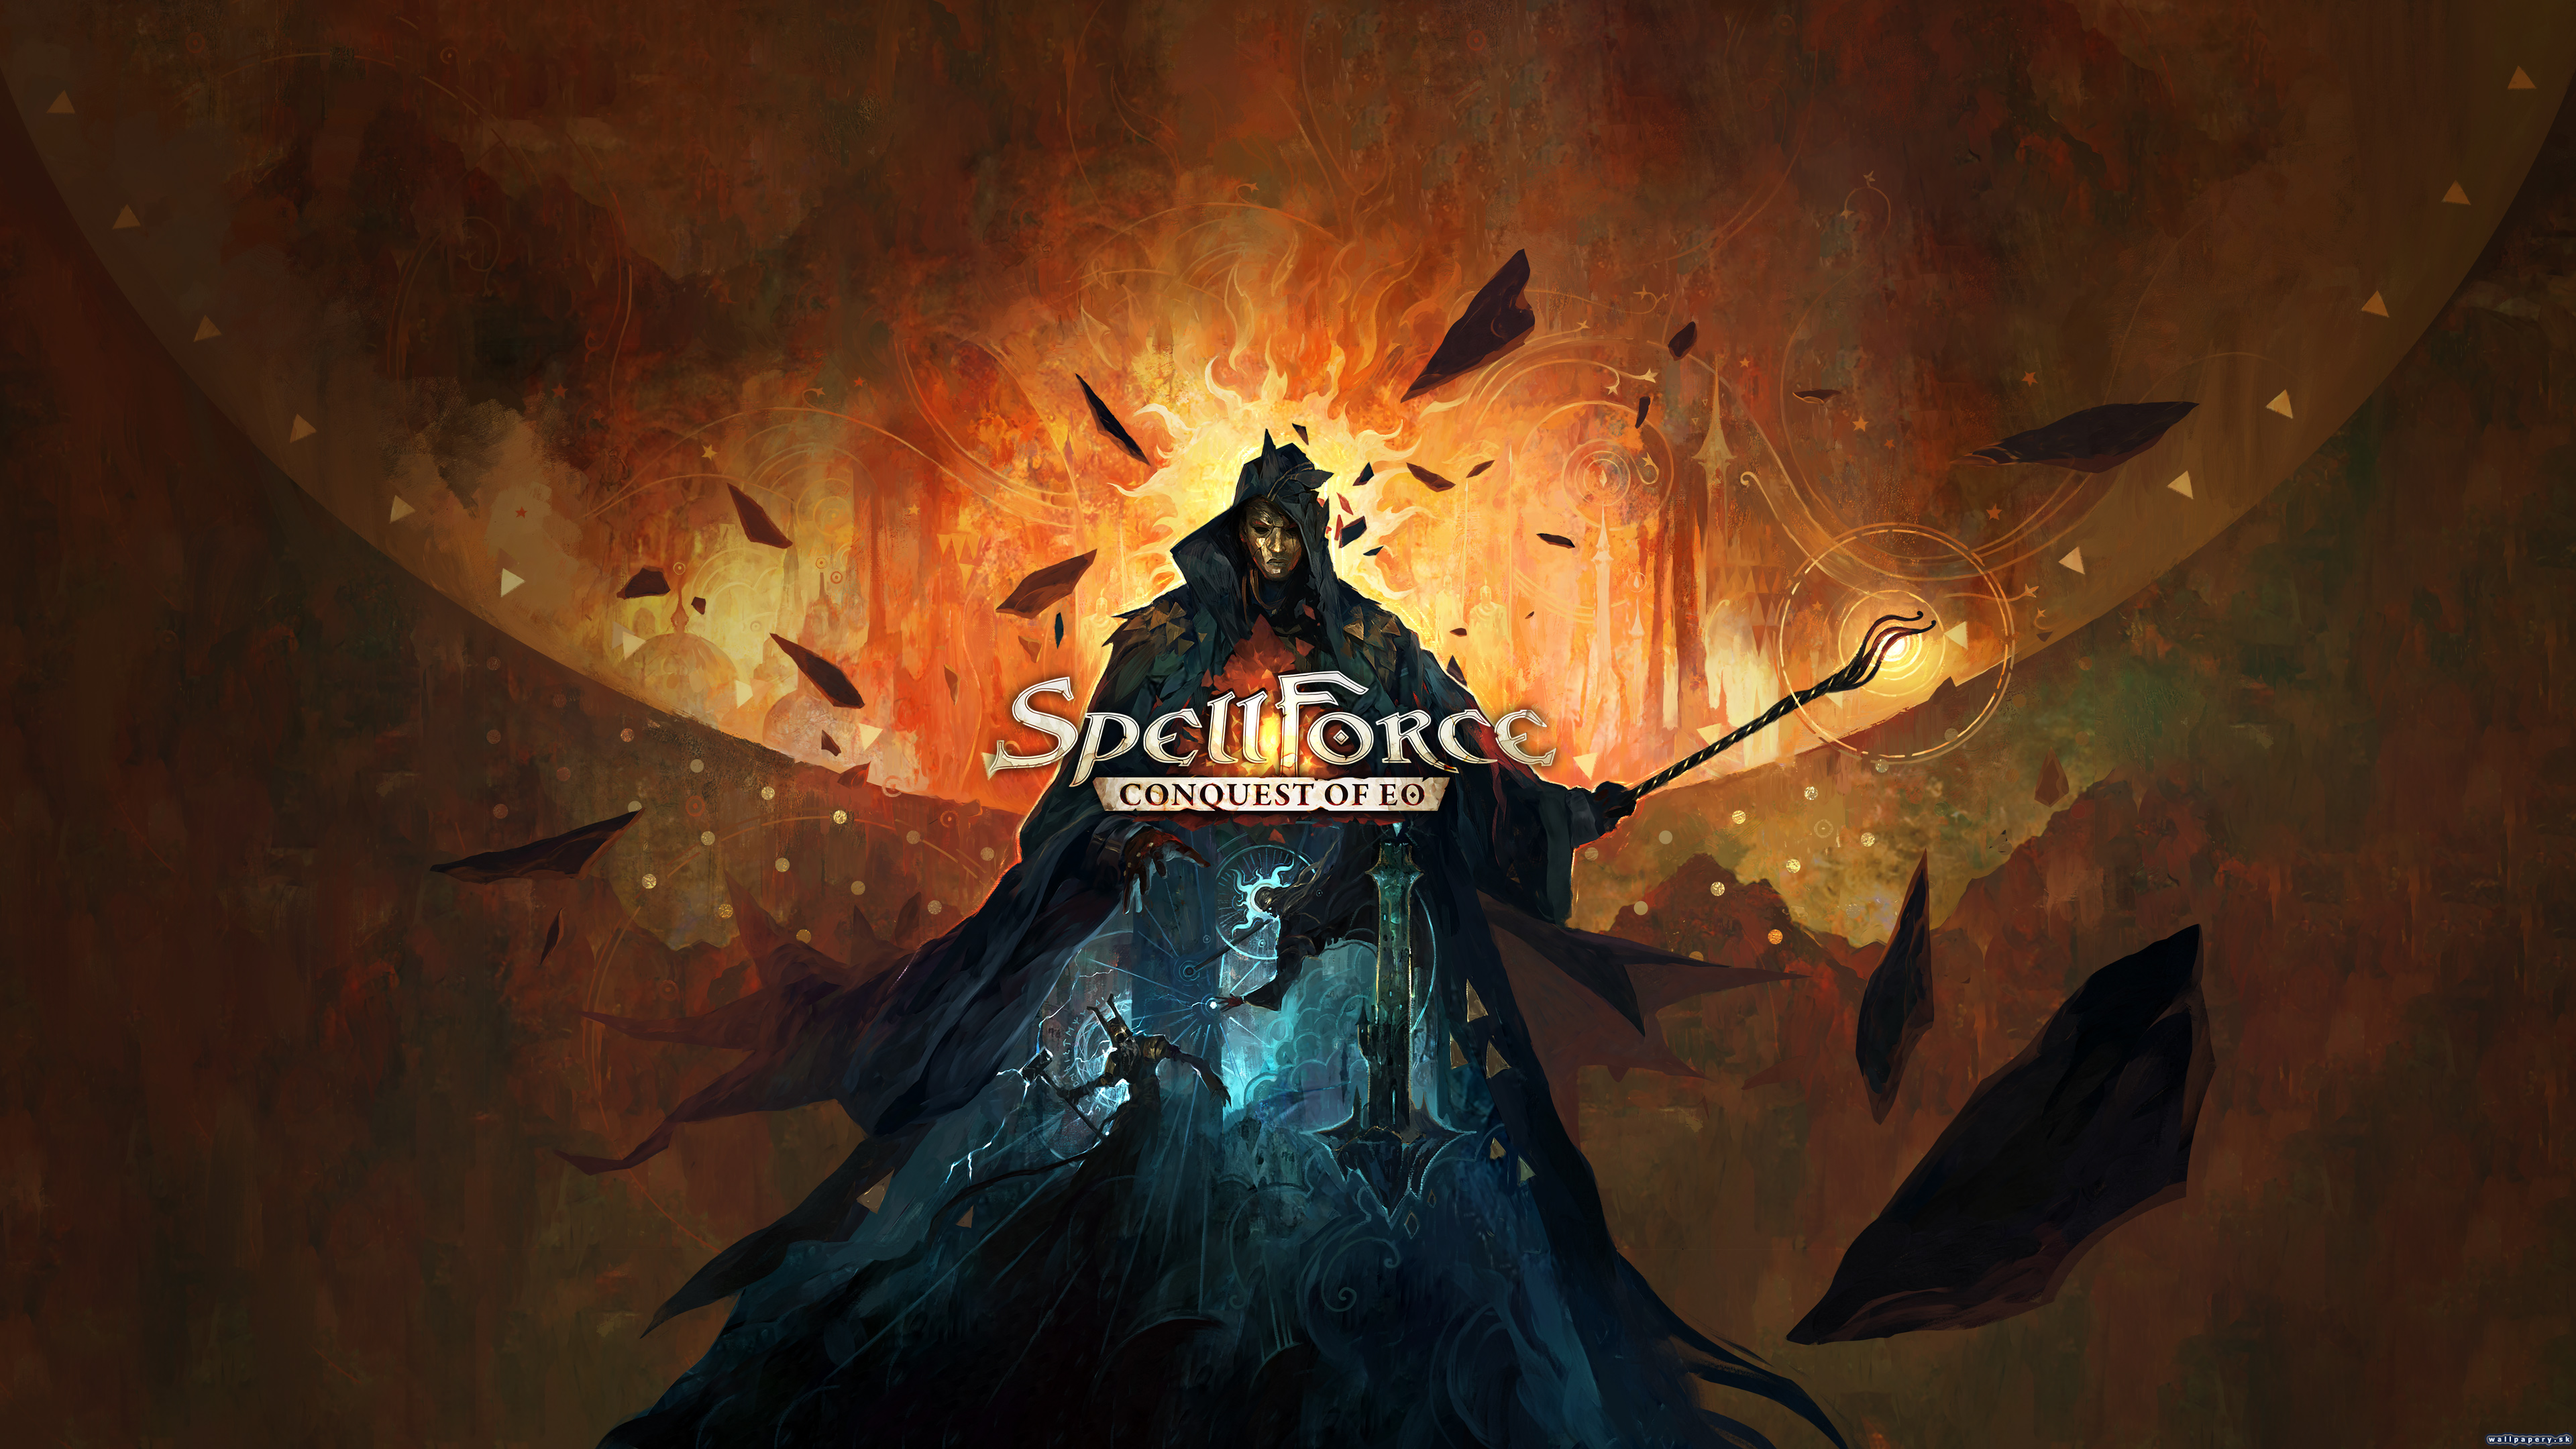 SpellForce: Conquest of Eo - wallpaper 1